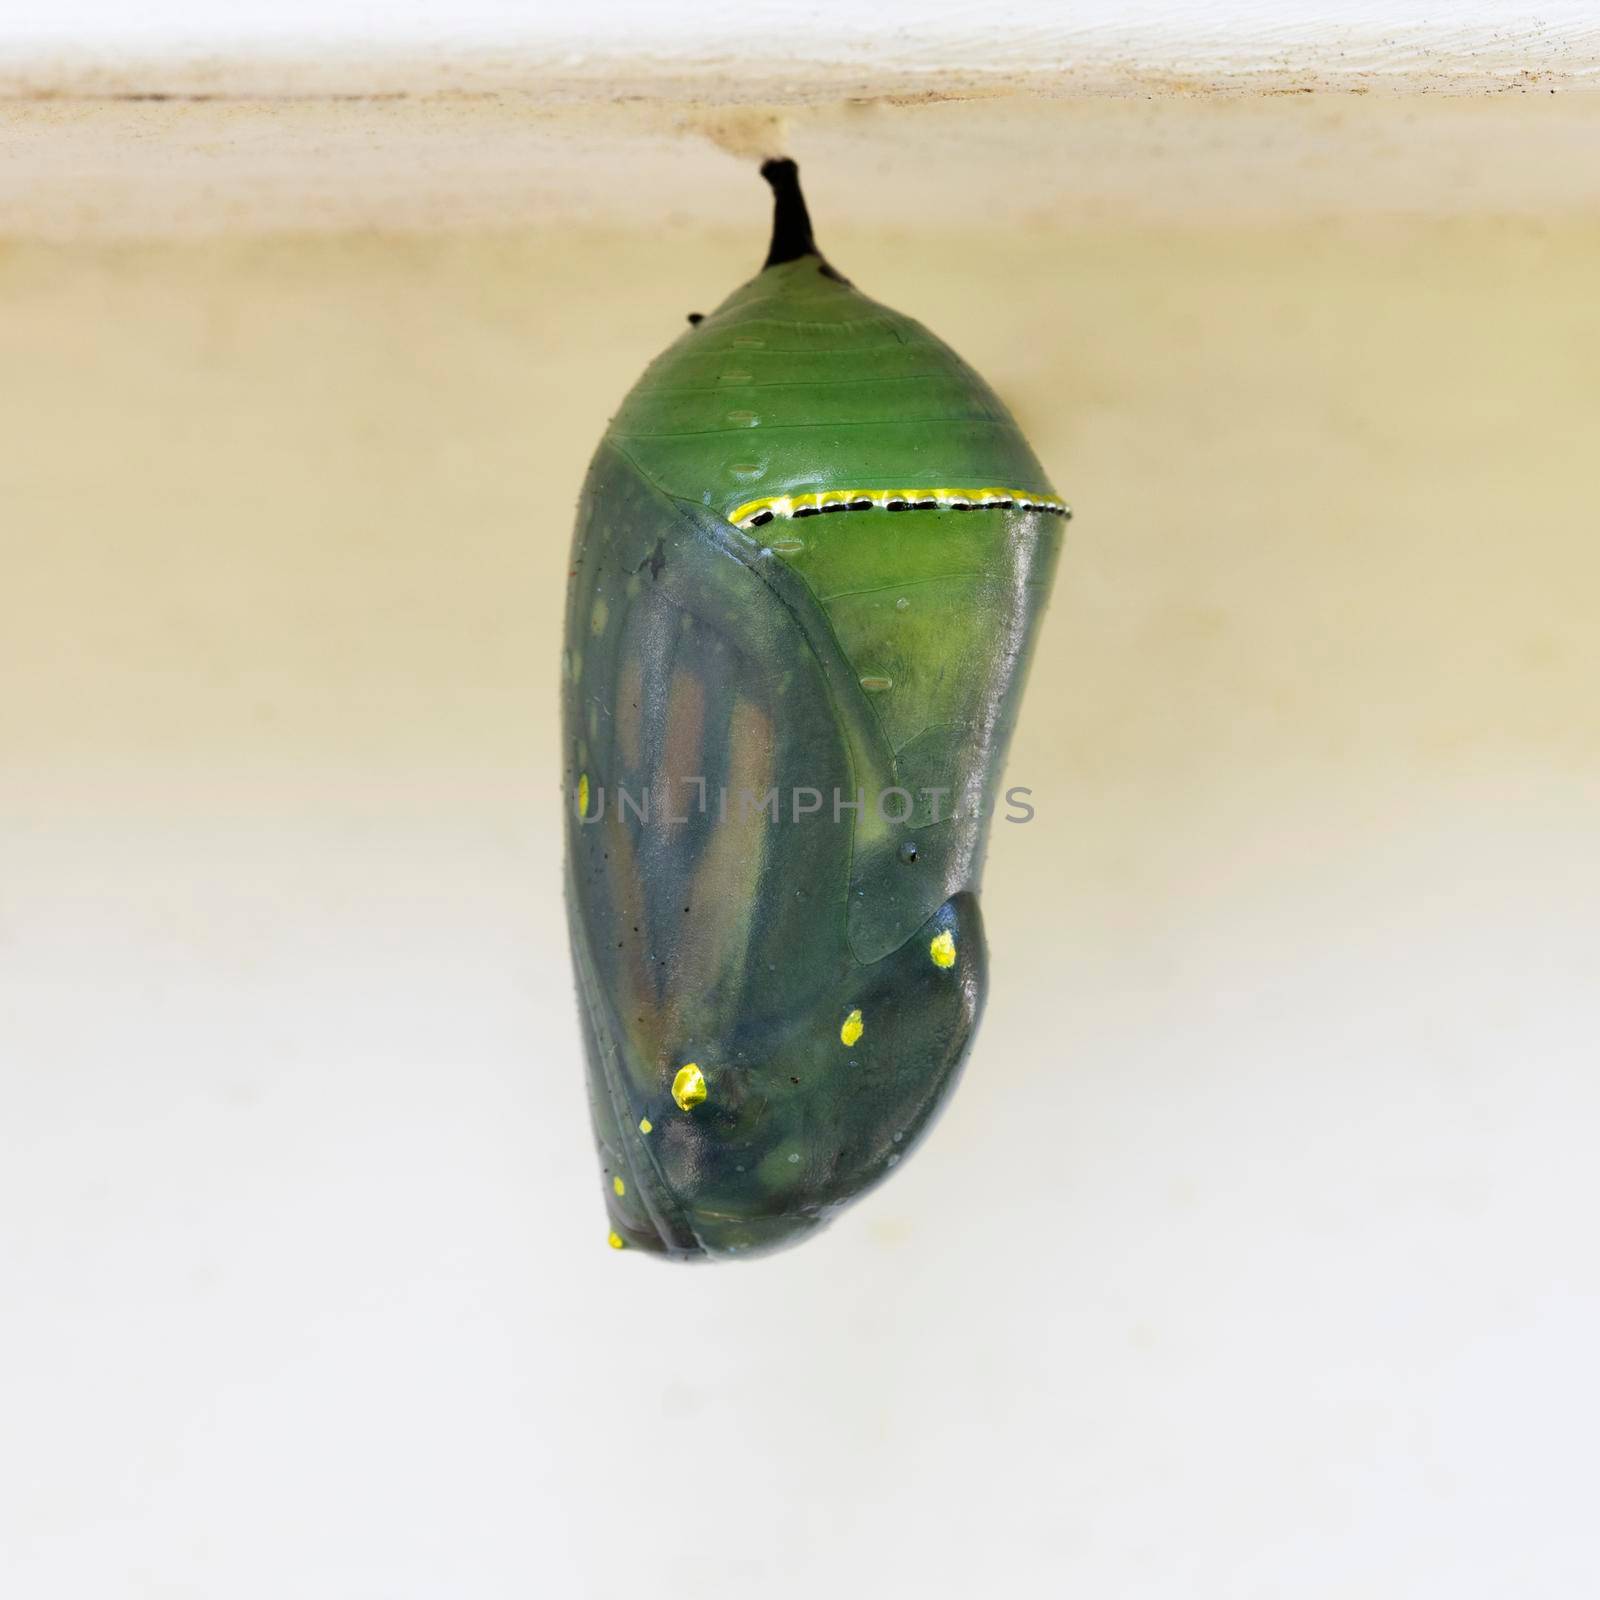 Monarch chrysalis with wings visible, close to emerging